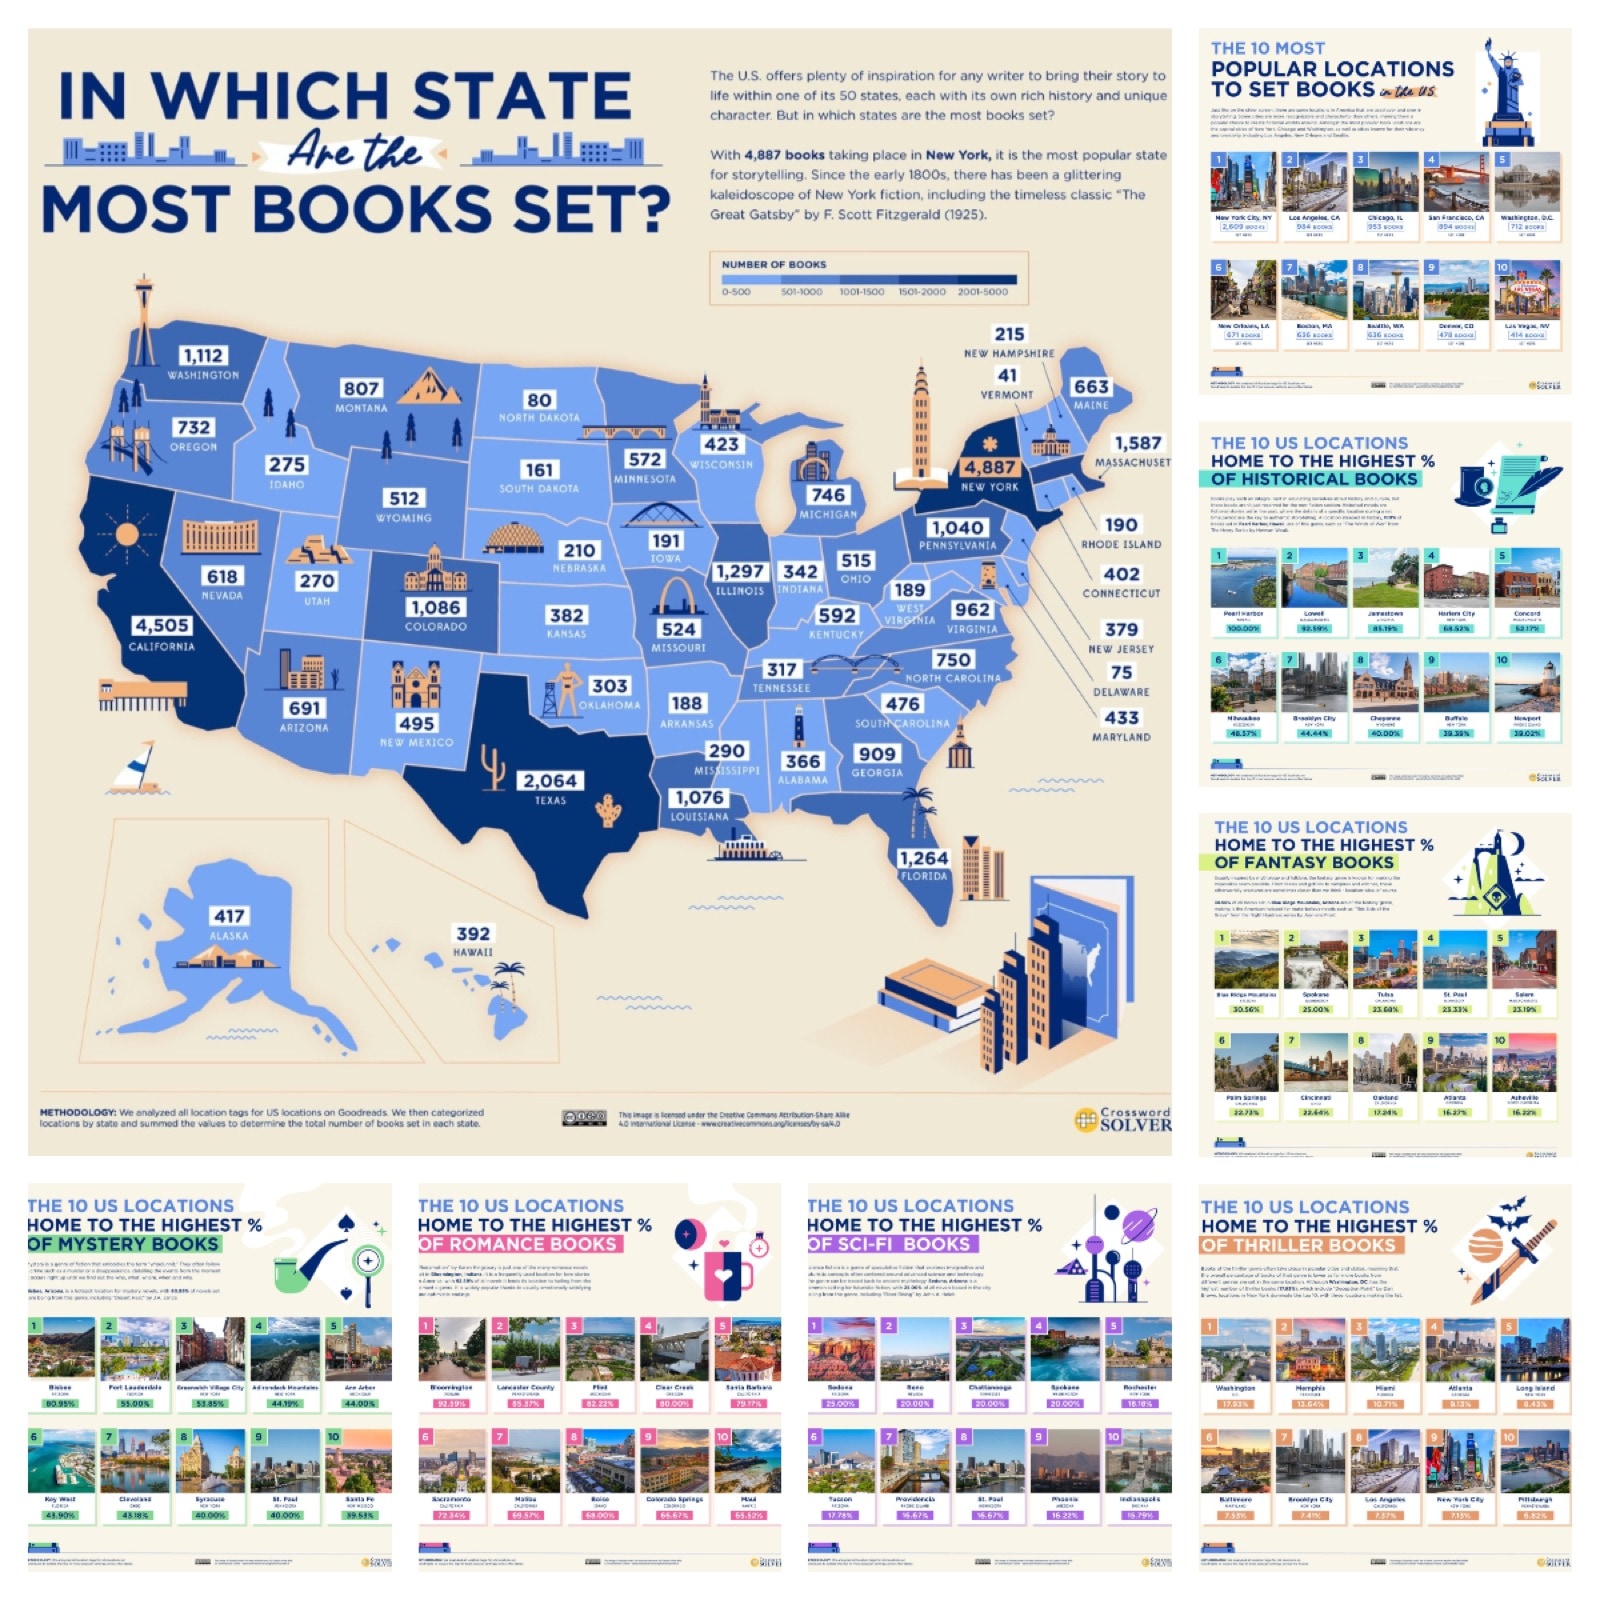 The most popular literary hotspots across America, by state and genre (infographics)